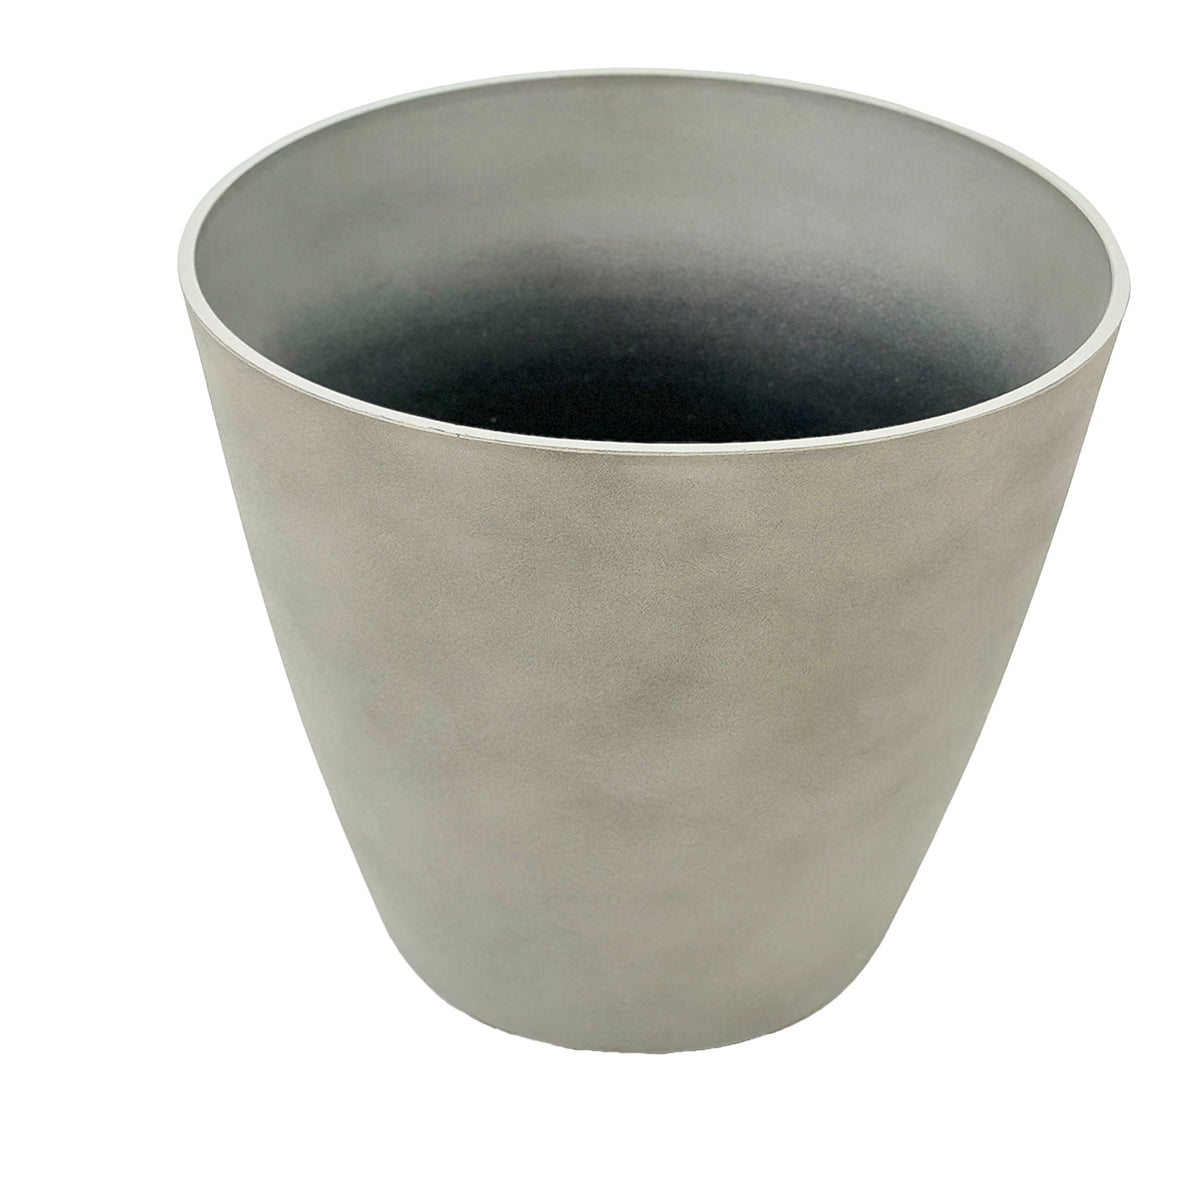 Essex Planter 28cm, Cement texture.Can be used indoors and outdoors, Light weight, Eco friendly and weather resistant,Front view.